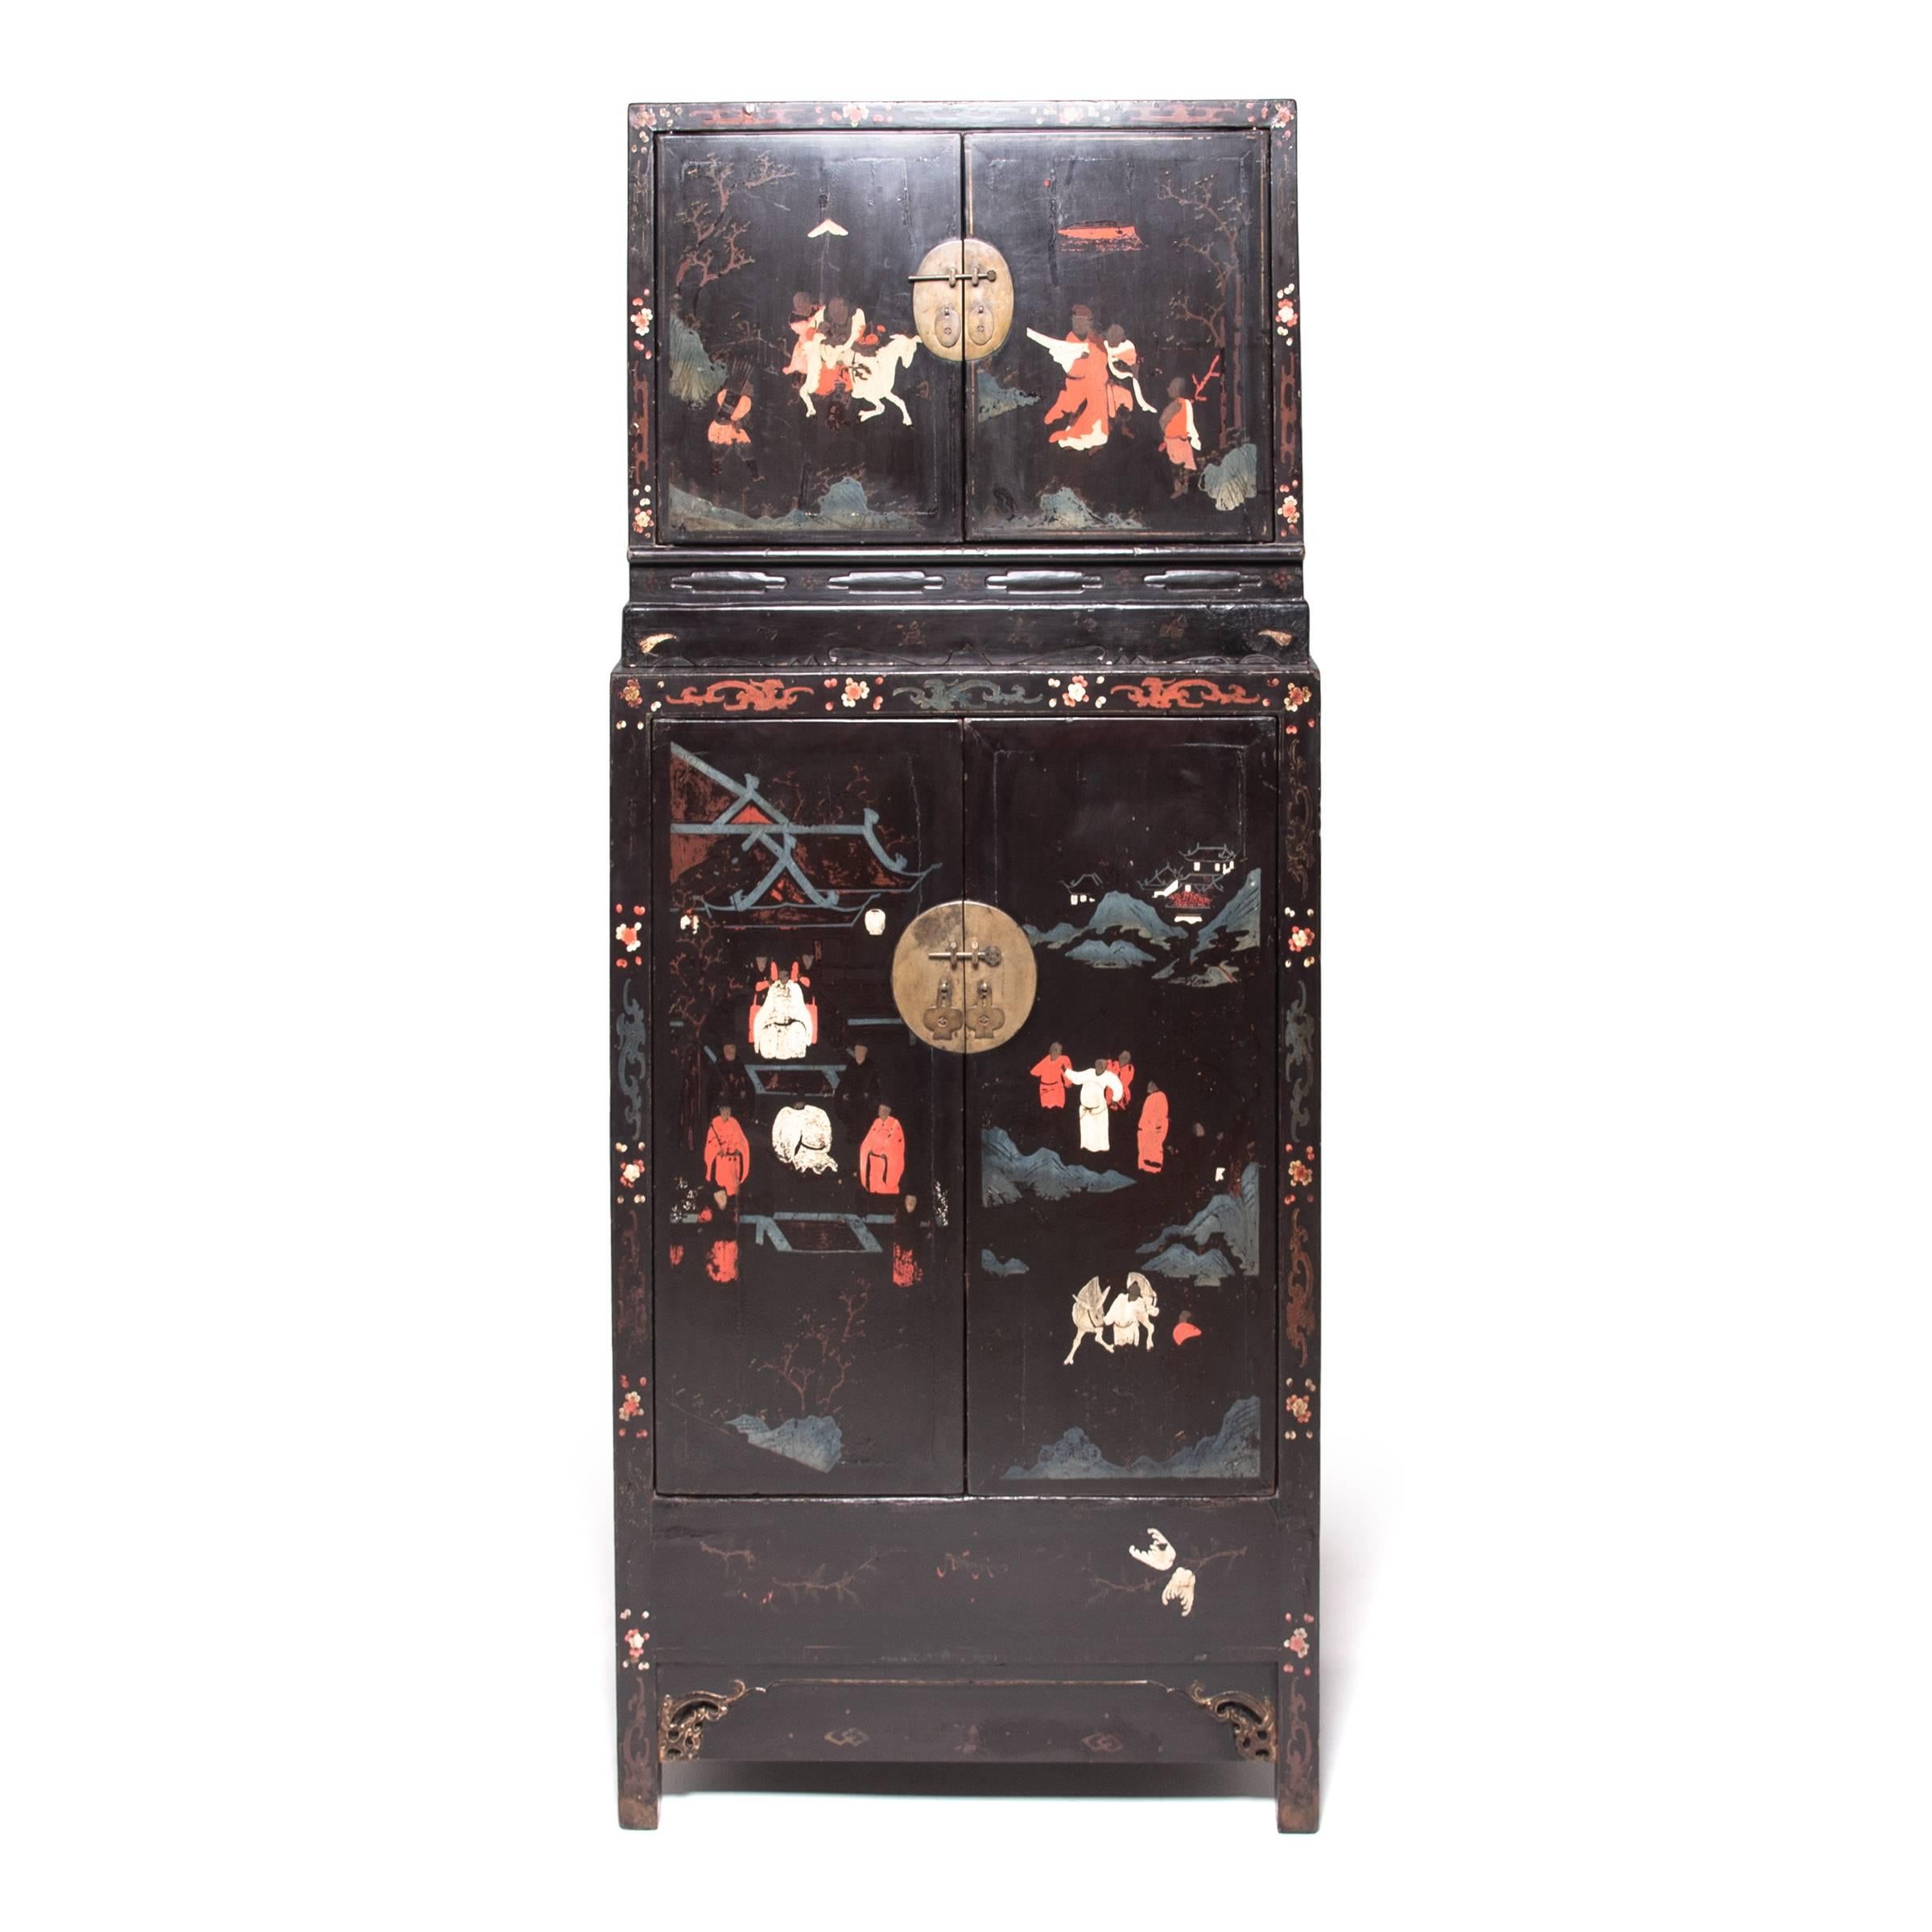 Seamlessly constructed and lacquered black, this pair of spectacular Ming-dynasty compound cabinets provided the perfect blank canvas for painted scenes of figures and horses in a garden landscape. Still vividly colored after centuries of use, the